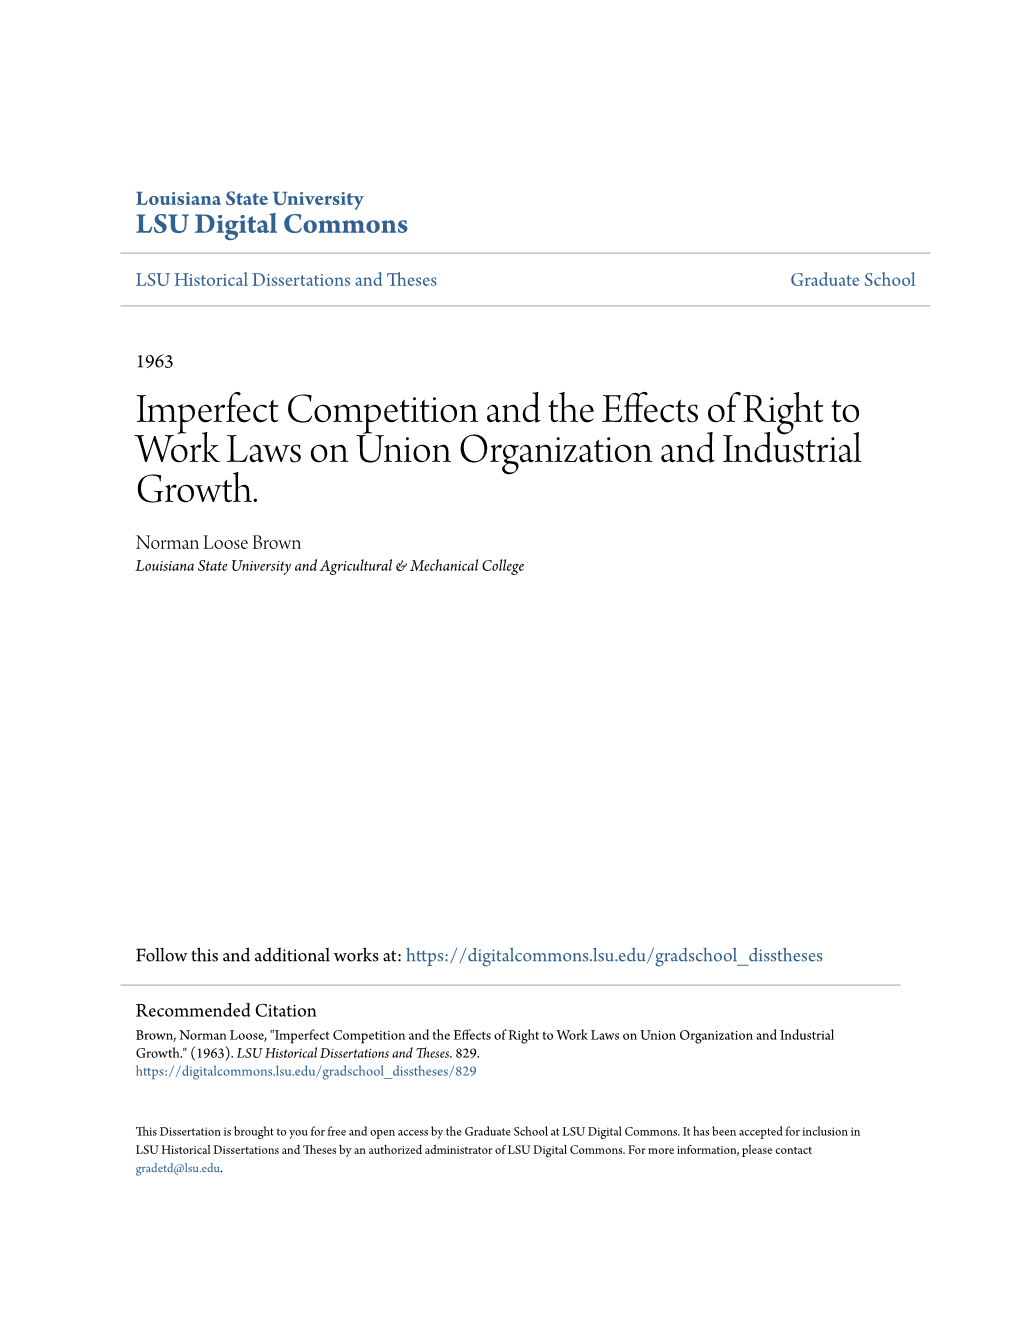 Imperfect Competition and the Effects of Right to Work Laws on Union Organization and Industrial Growth